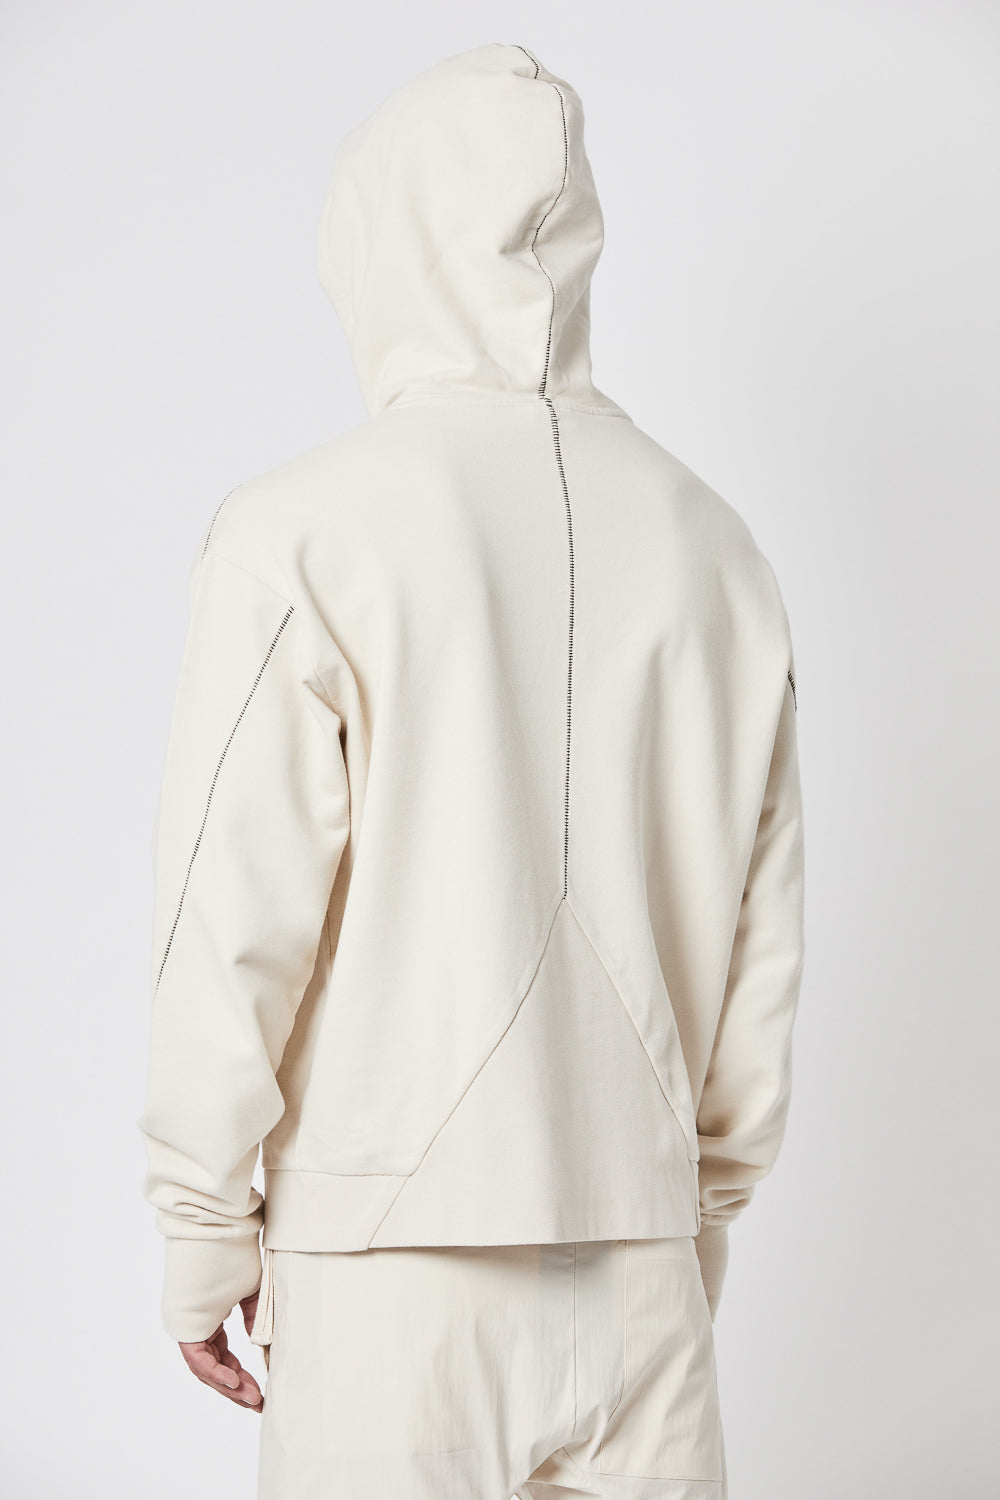 Buy the Thom Krom M S 156 Hoodie in Ivory at Intro. Spend £50 for free UK delivery. Official stockists. We ship worldwide.